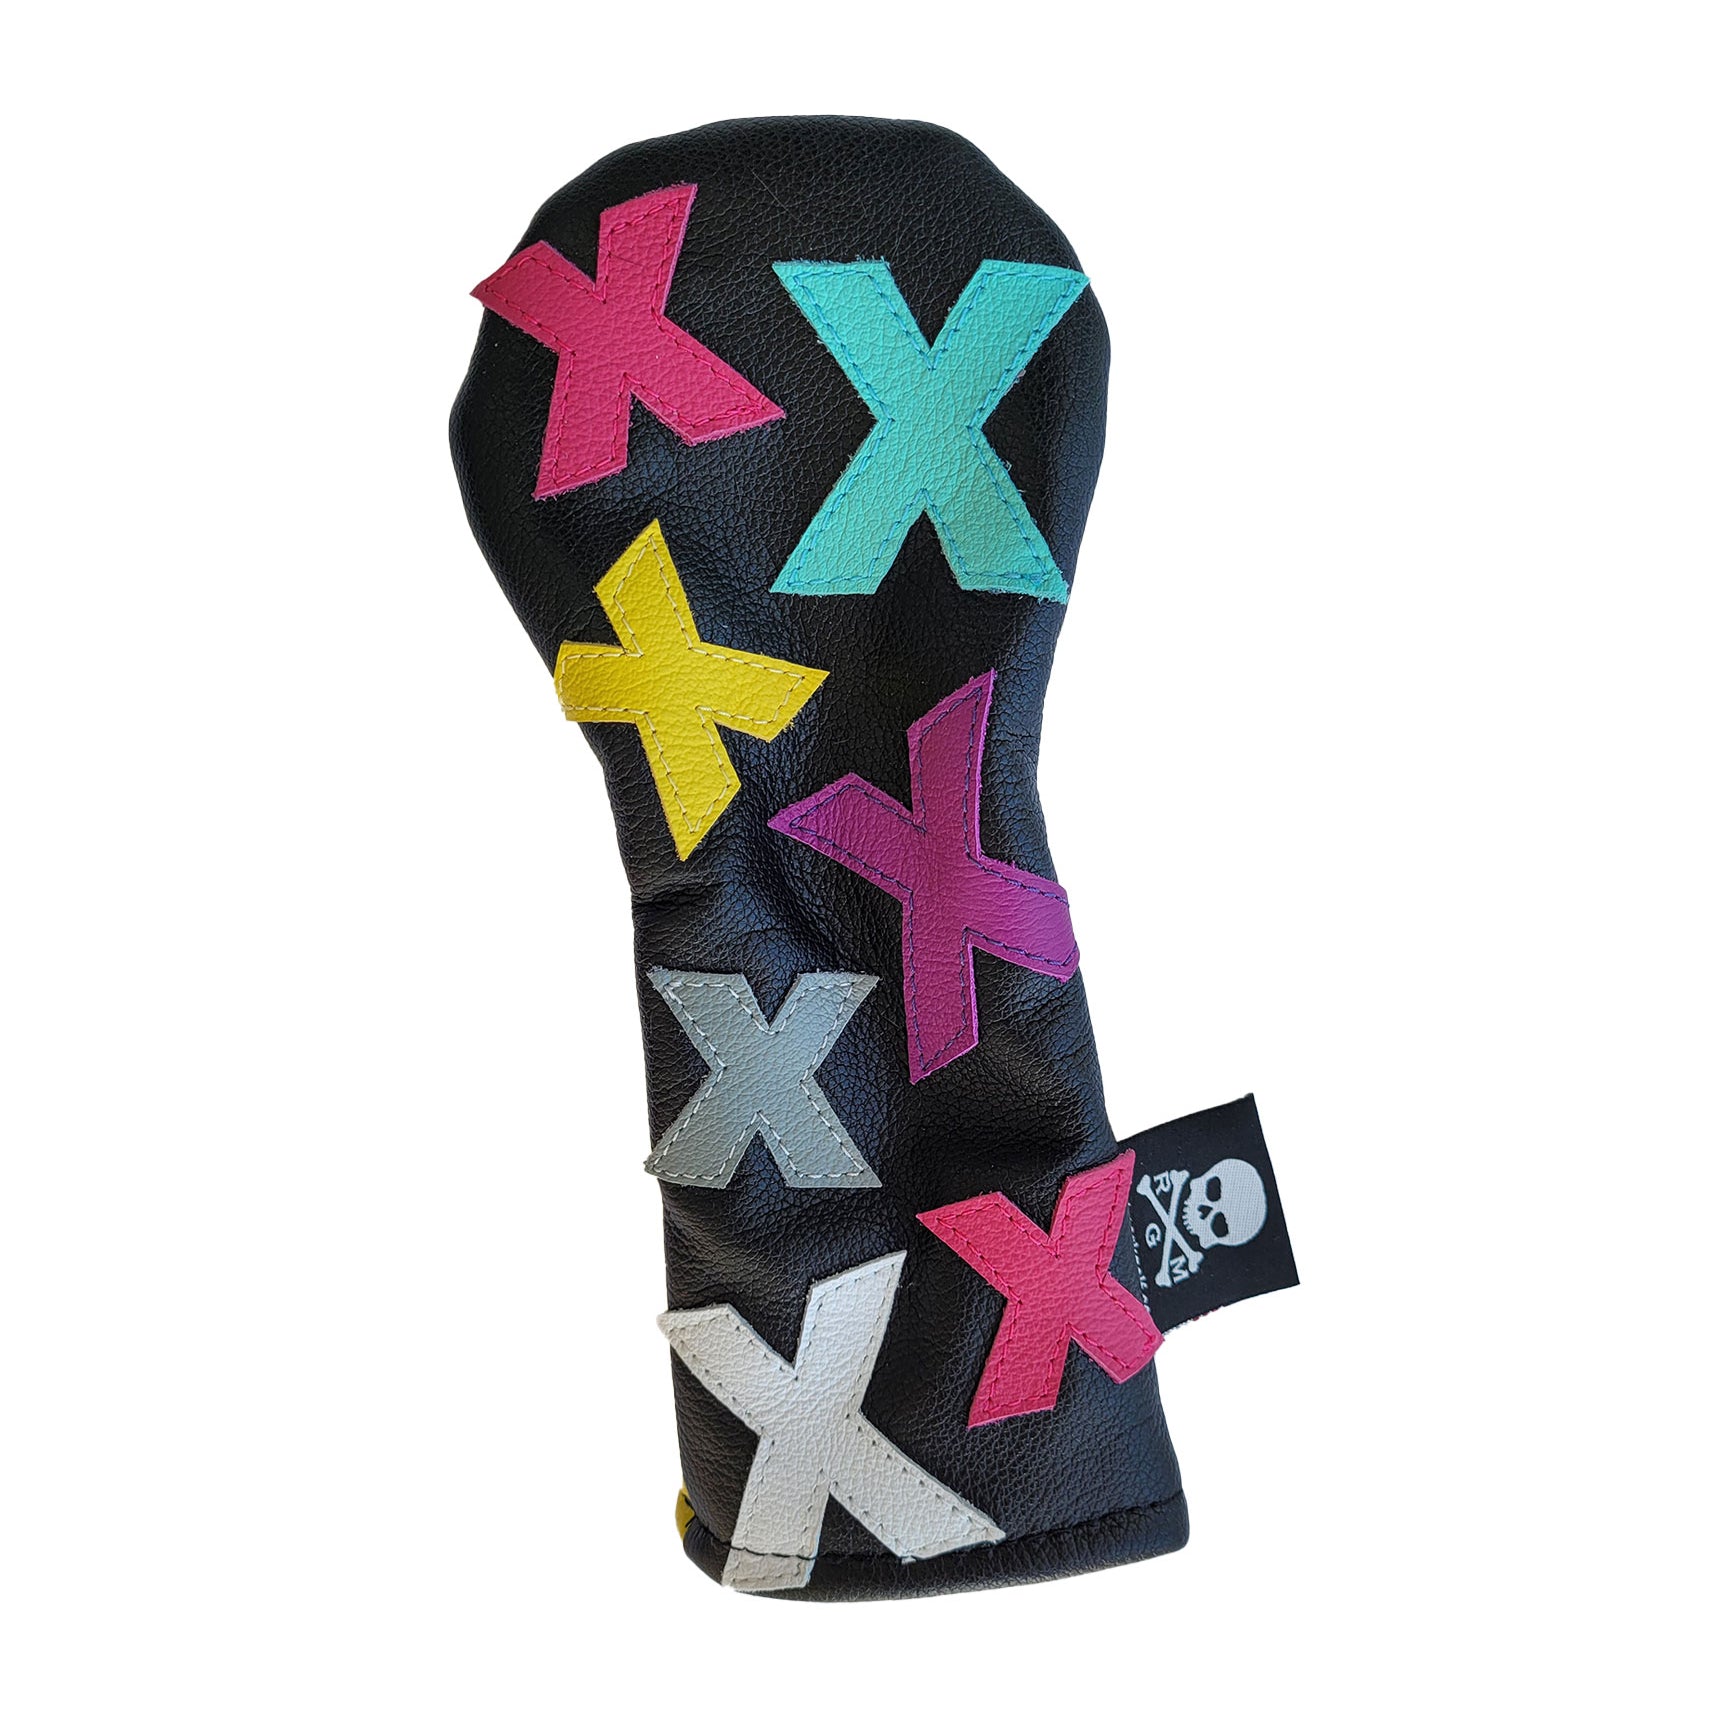 One-Of-A-Kind! The Black "Dancing X's" Hybrid Headcover - Robert Mark Golf